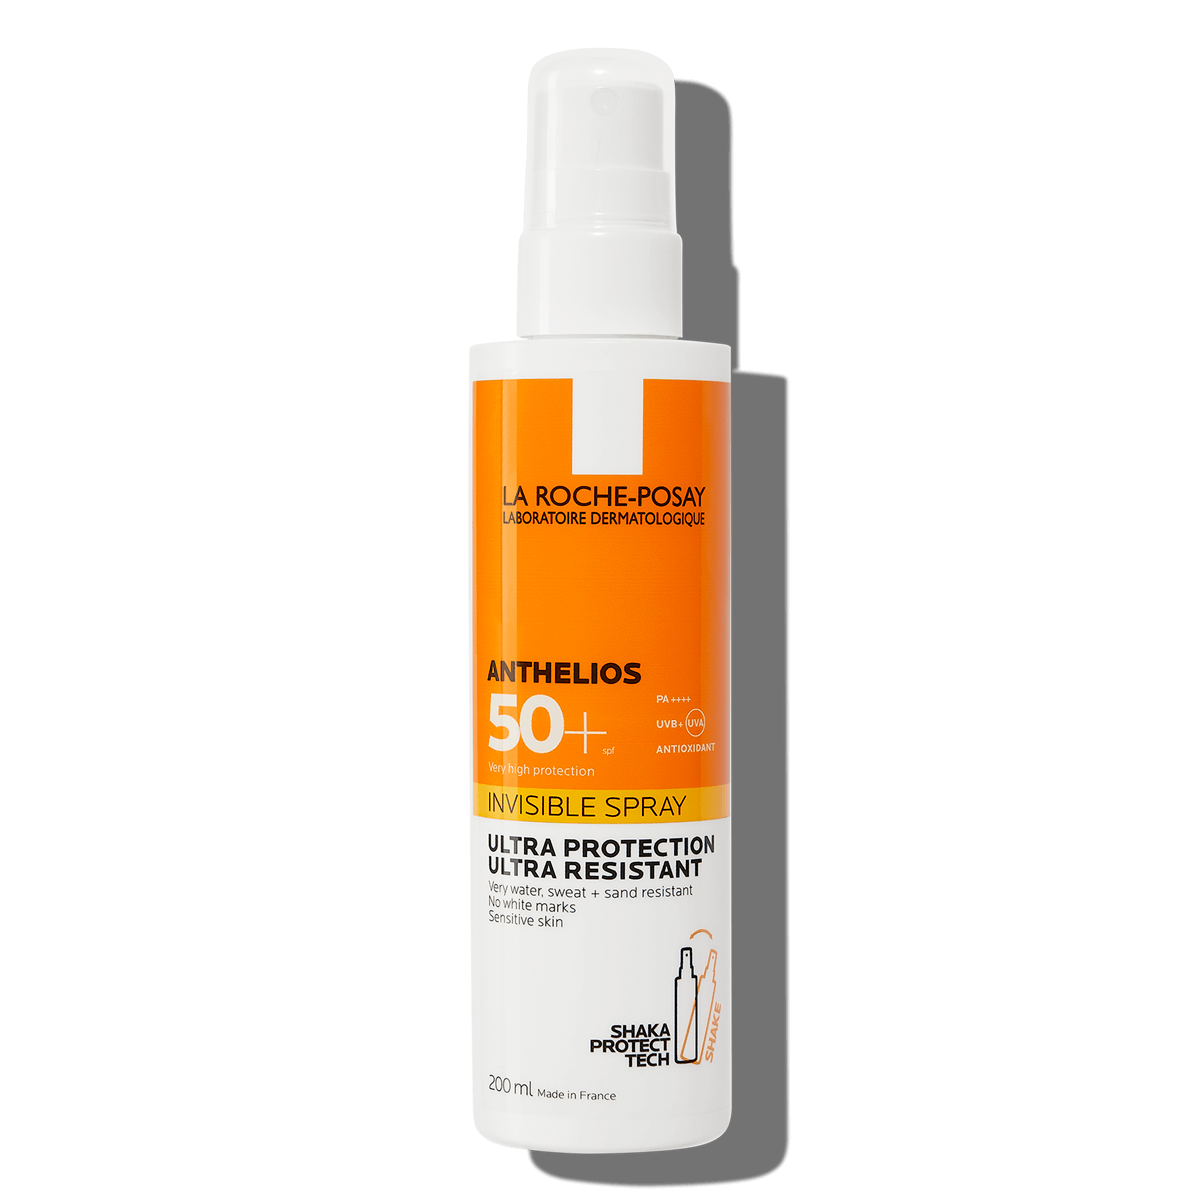 Install Bruise Soon Anthelios Invisible Spray Spf50+ | La Roche-Posay